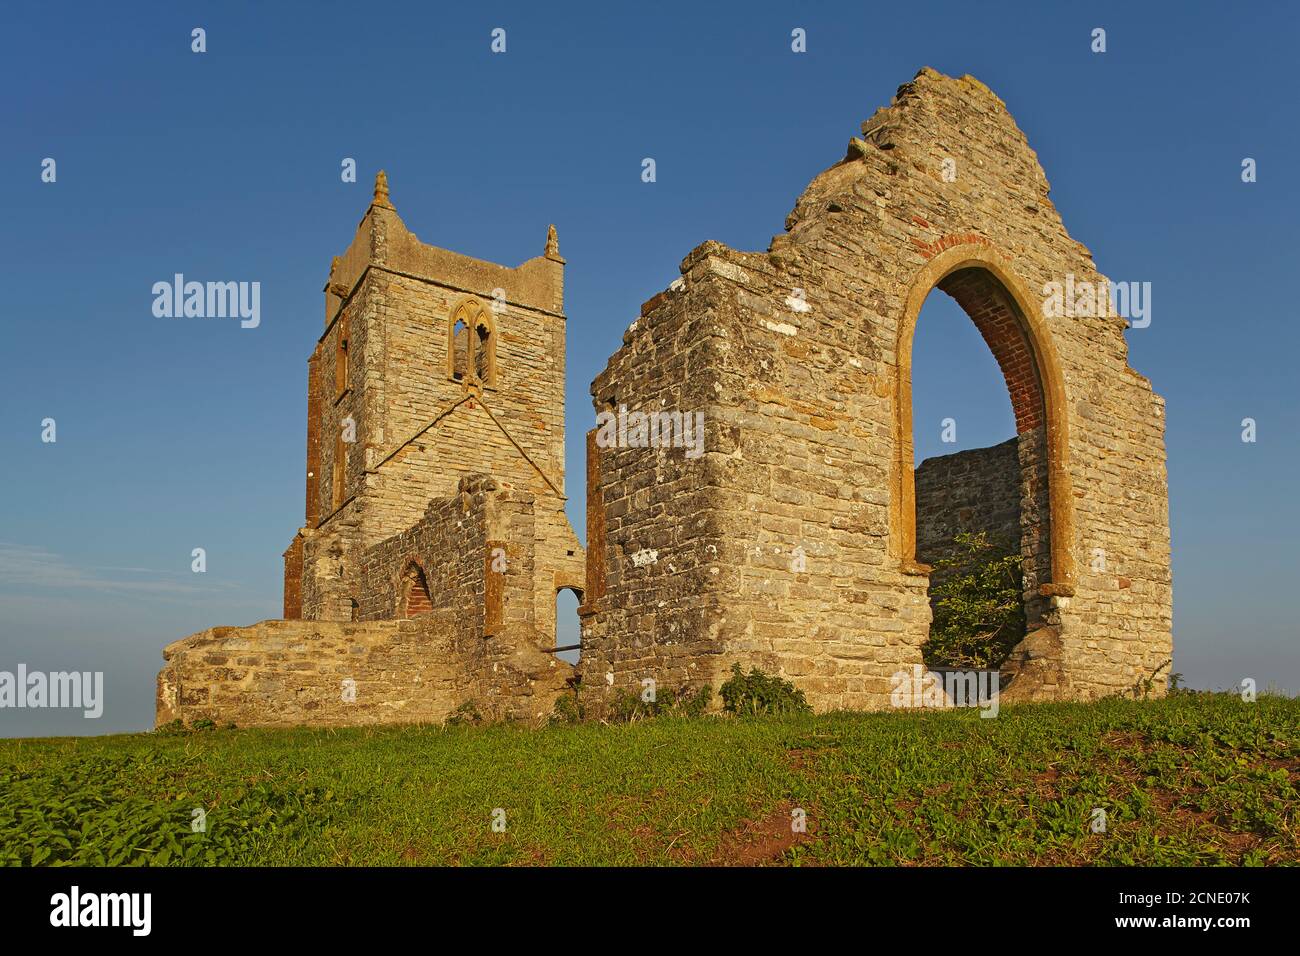 The ruins of St. Michael's Church on the summit of Burrow Mump, a small hill at Burrowbridge, in the Somerset Levels, Somerset, England Stock Photo